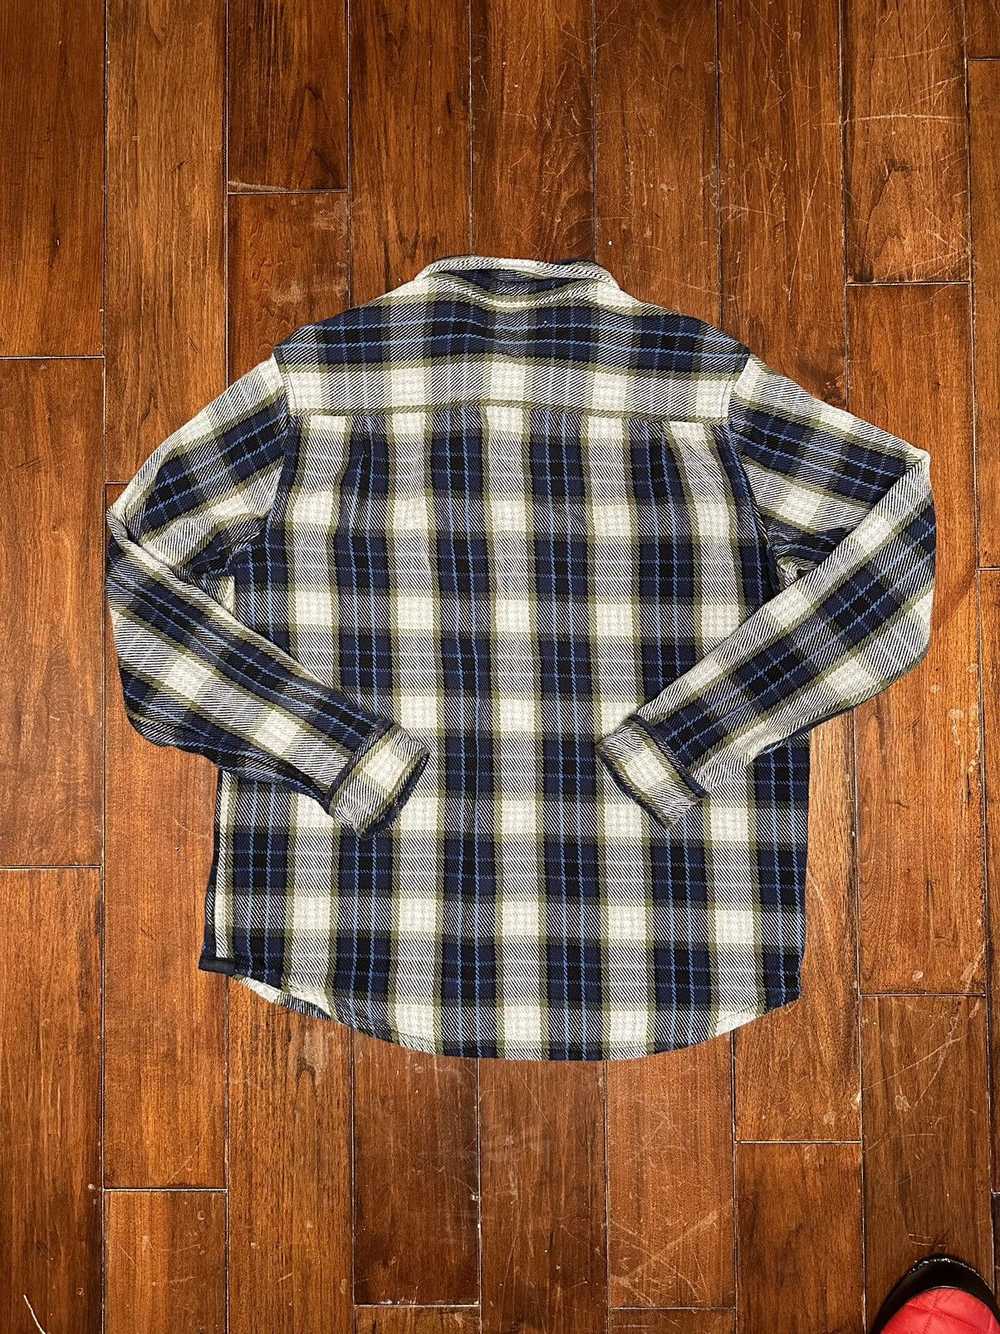 Outerknown outerknown blanket flannel - image 3